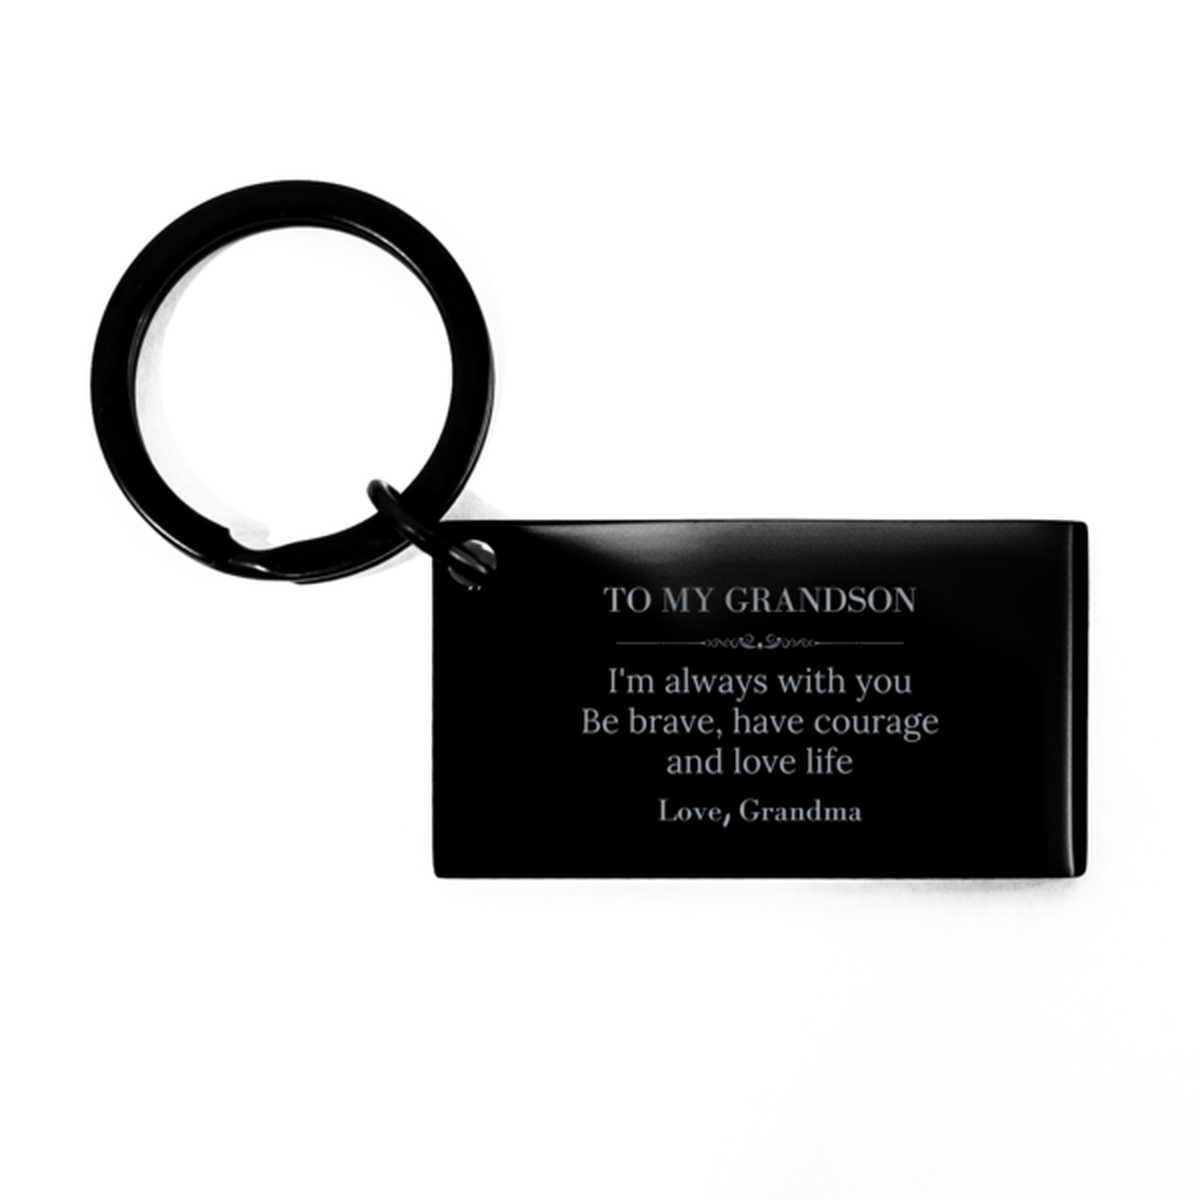 To My Grandson Gifts from Grandma, Unique Keychain Inspirational Christmas Birthday Graduation Gifts for Grandson I'm always with you. Be brave, have courage and love life. Love, Grandma